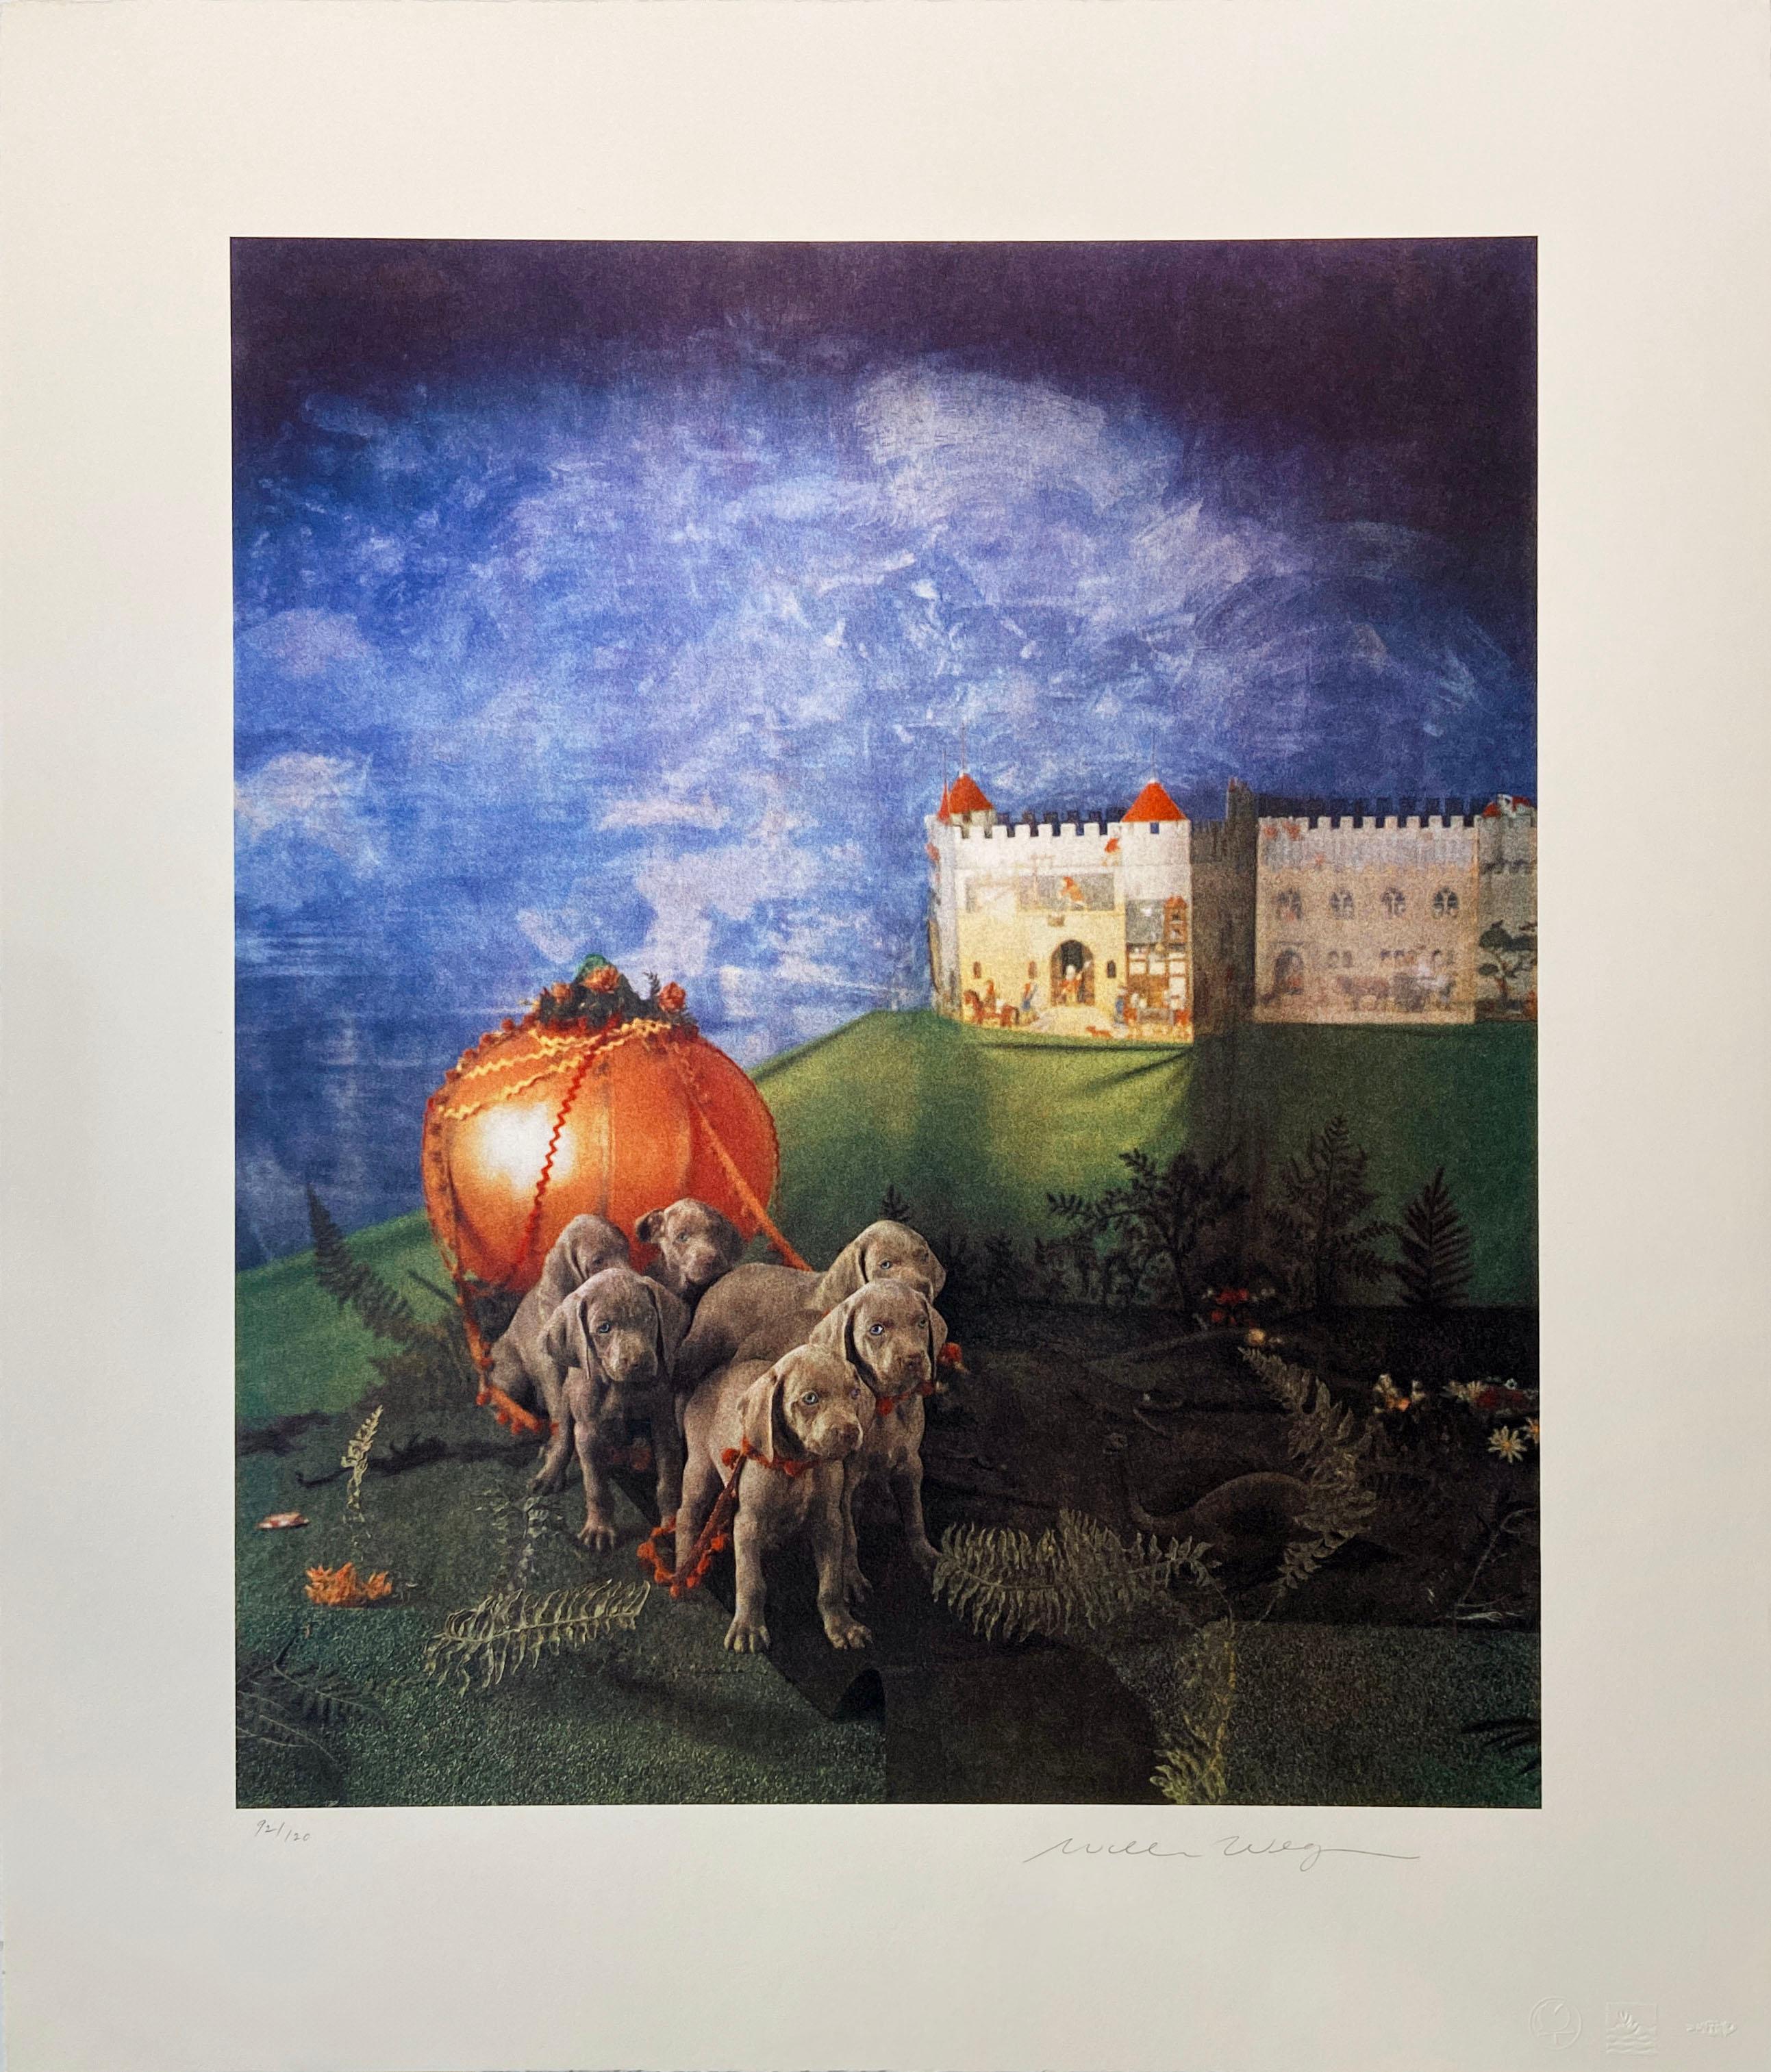 6 Pups and The Pumpkin Carriage - Print by William Wegman